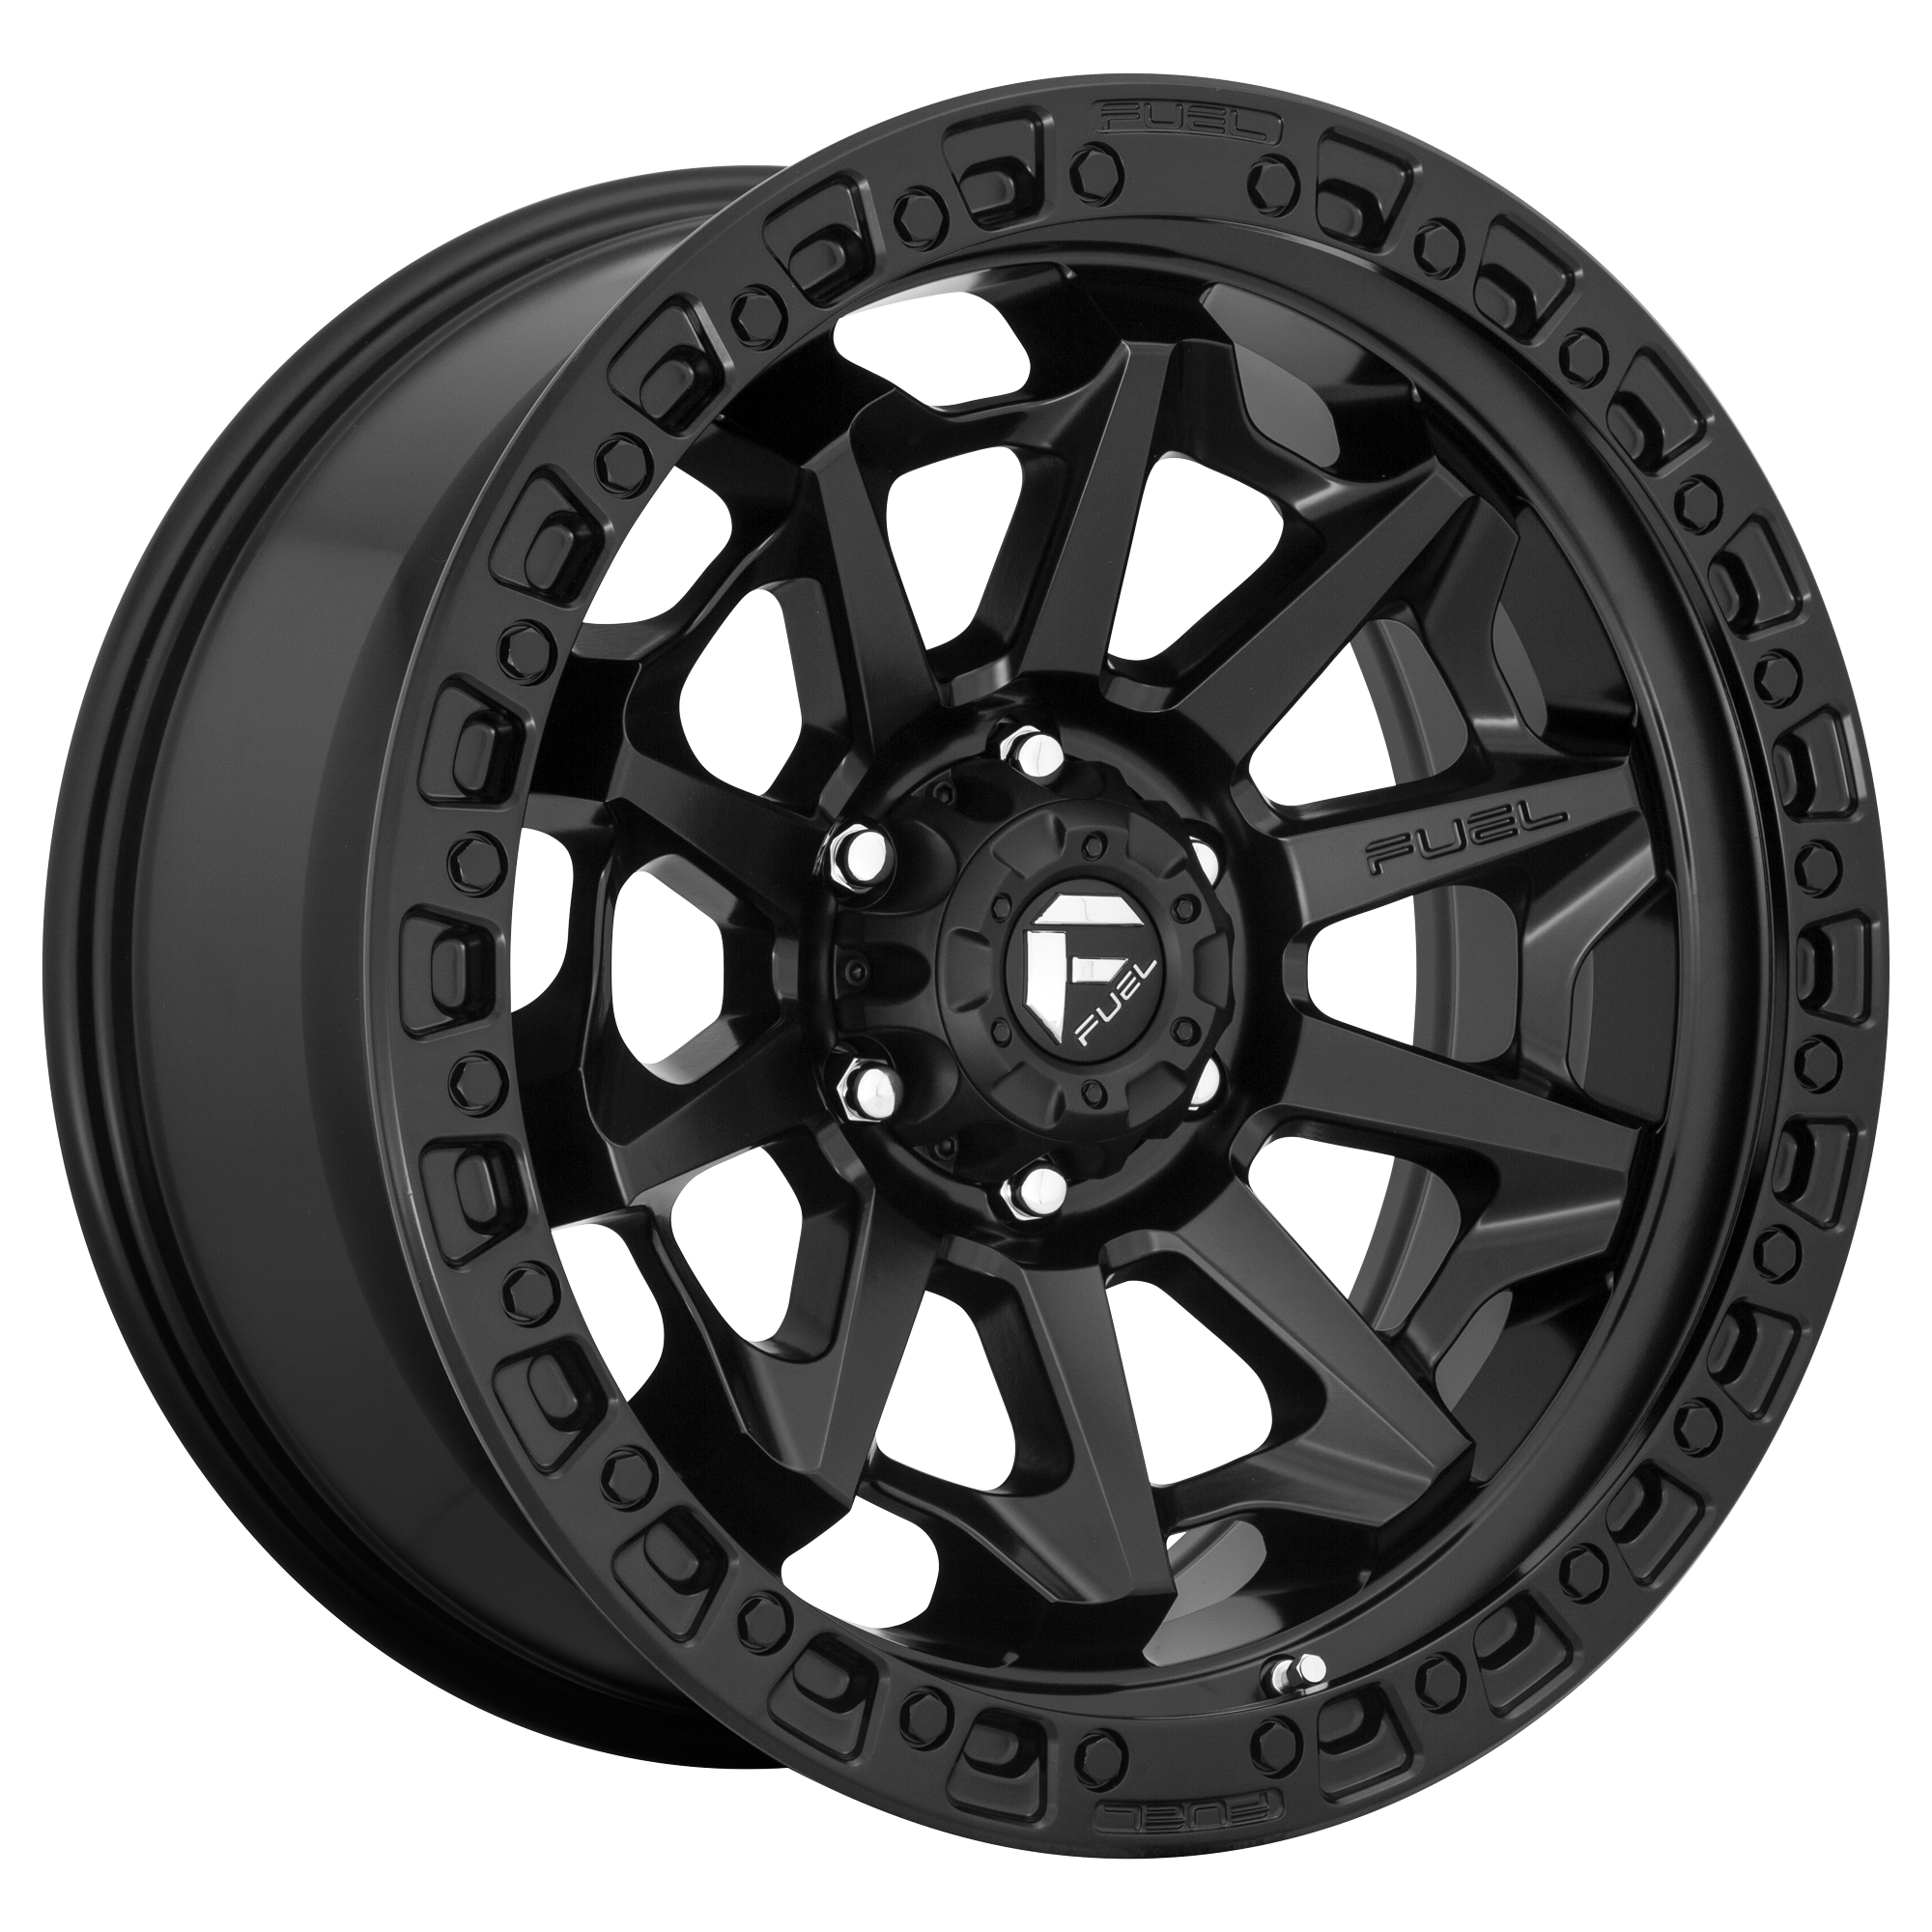 COVERT 17x9 6x139.70 MATTE BLACK (1 mm) - Tires and Engine Performance